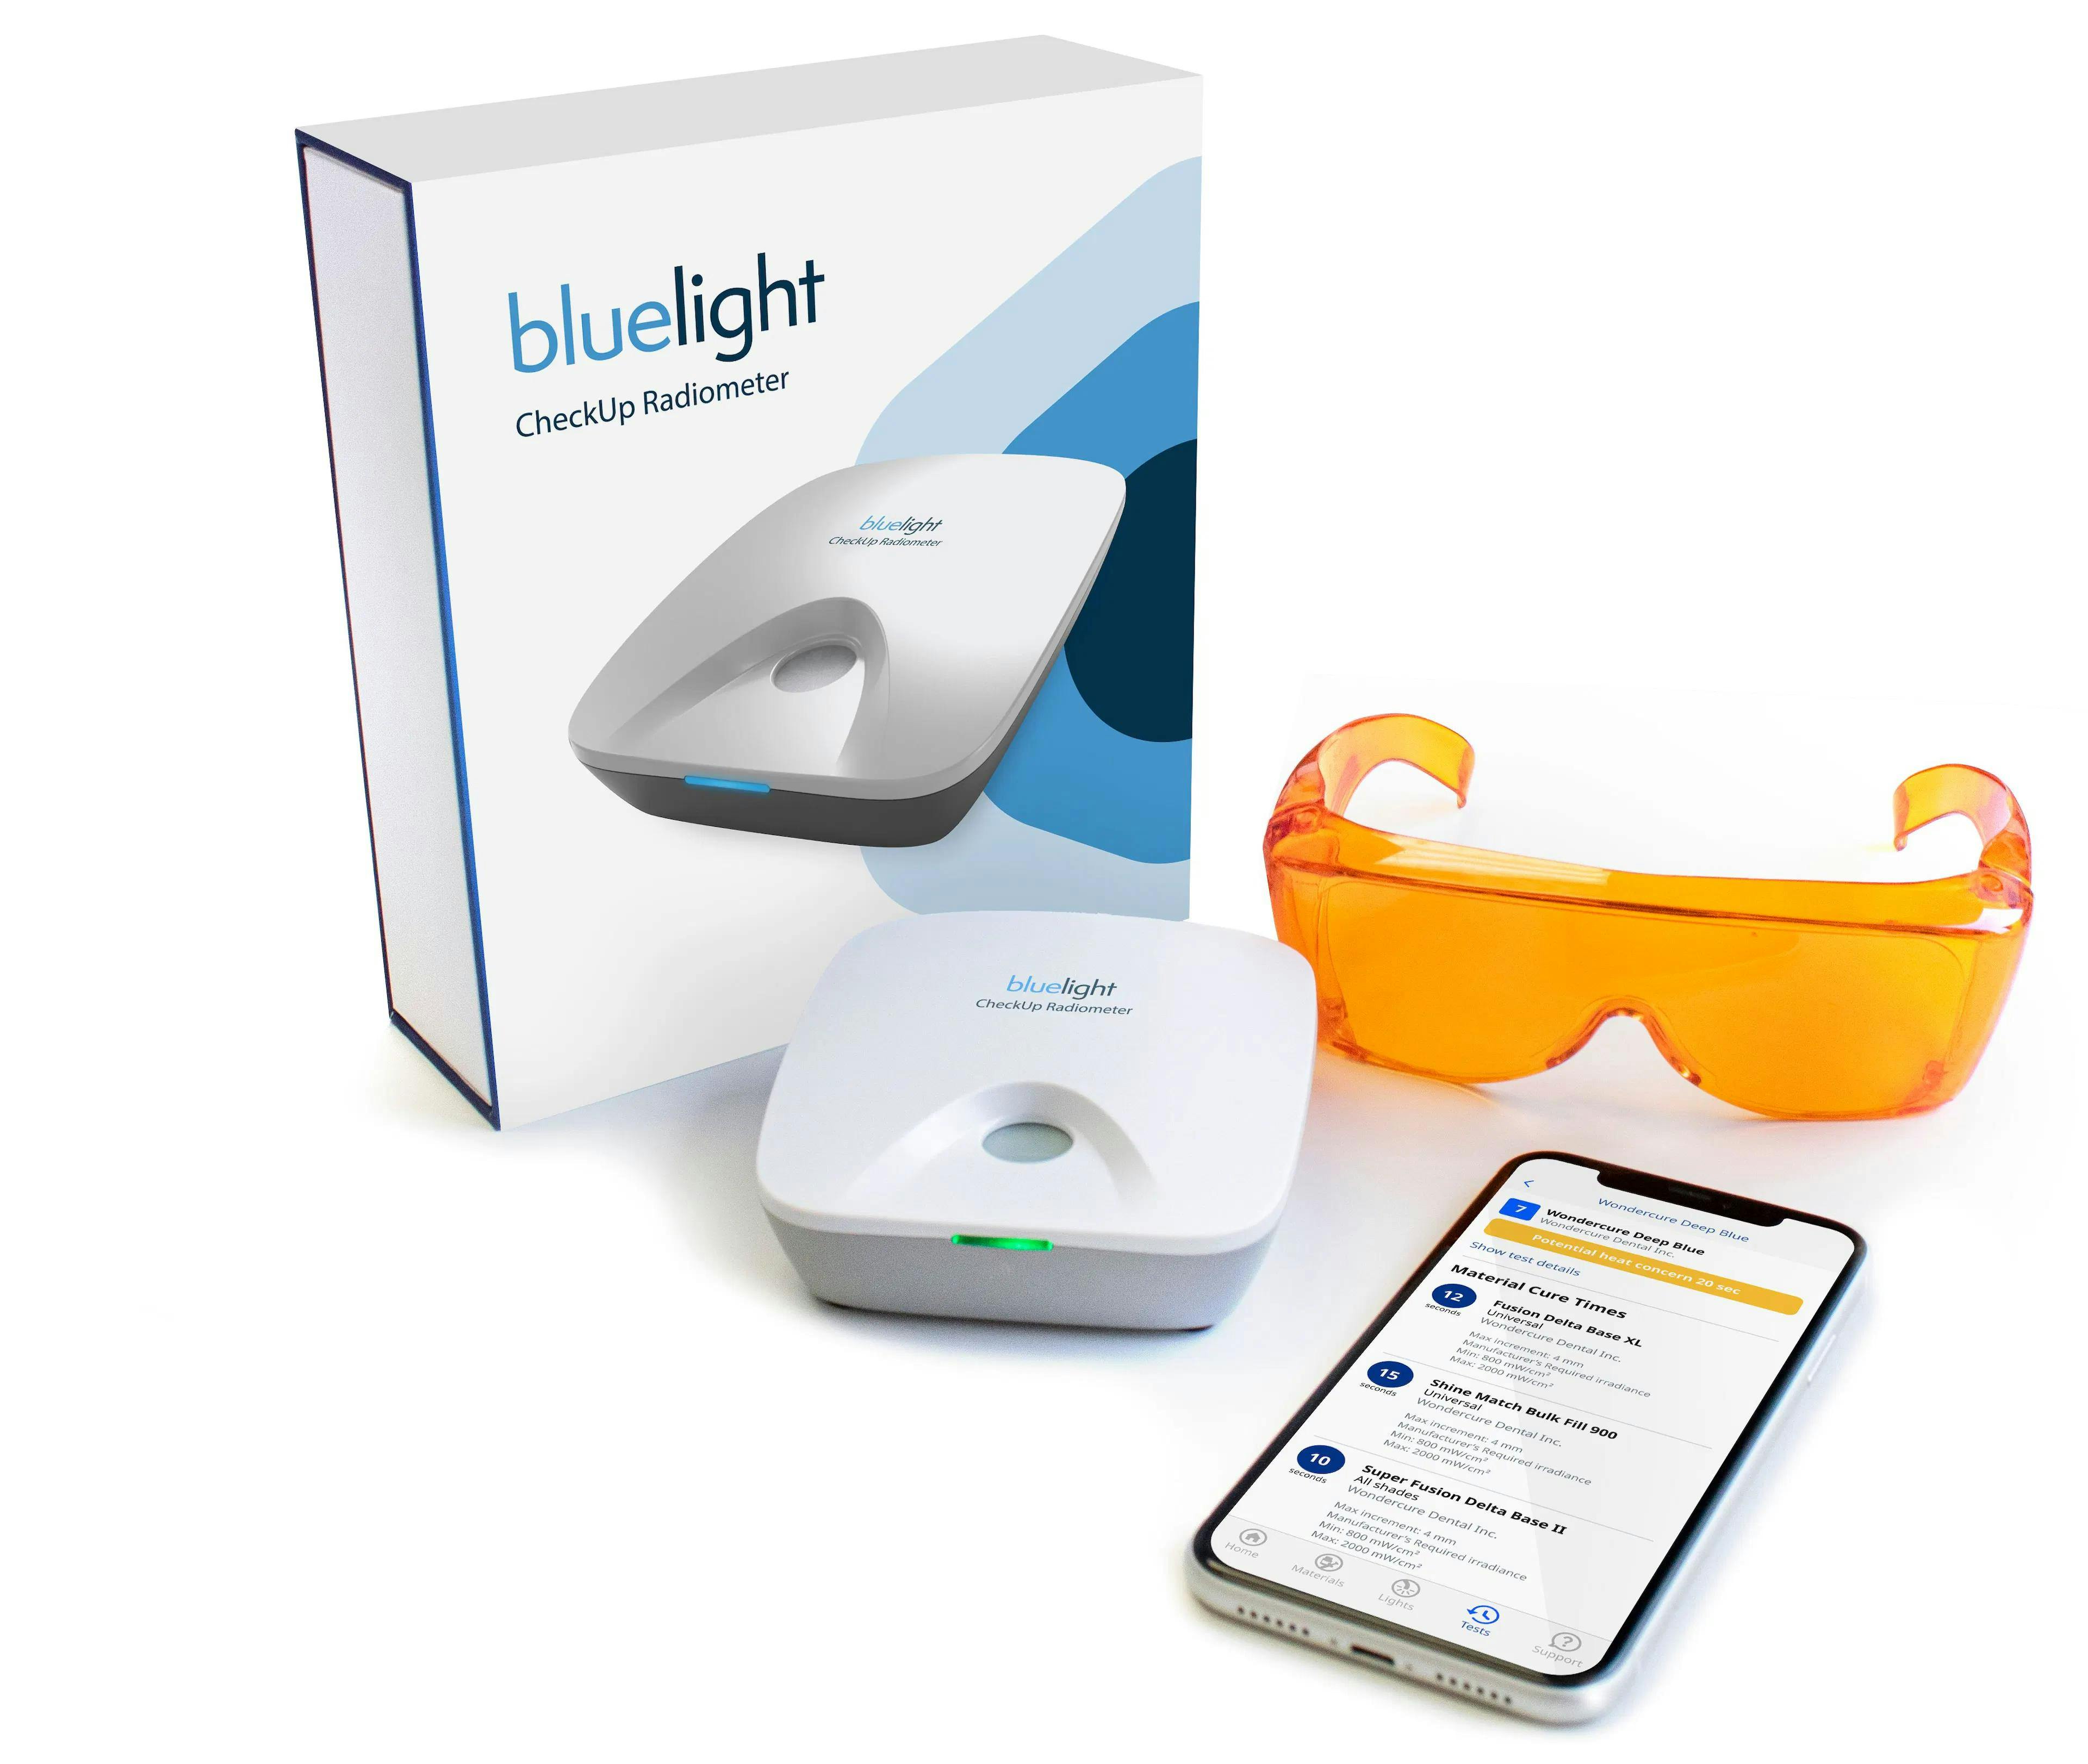 Bluelight Receives Patent for its CheckUp Smart Radiometer | Image Credit: © Bluelight Analytics